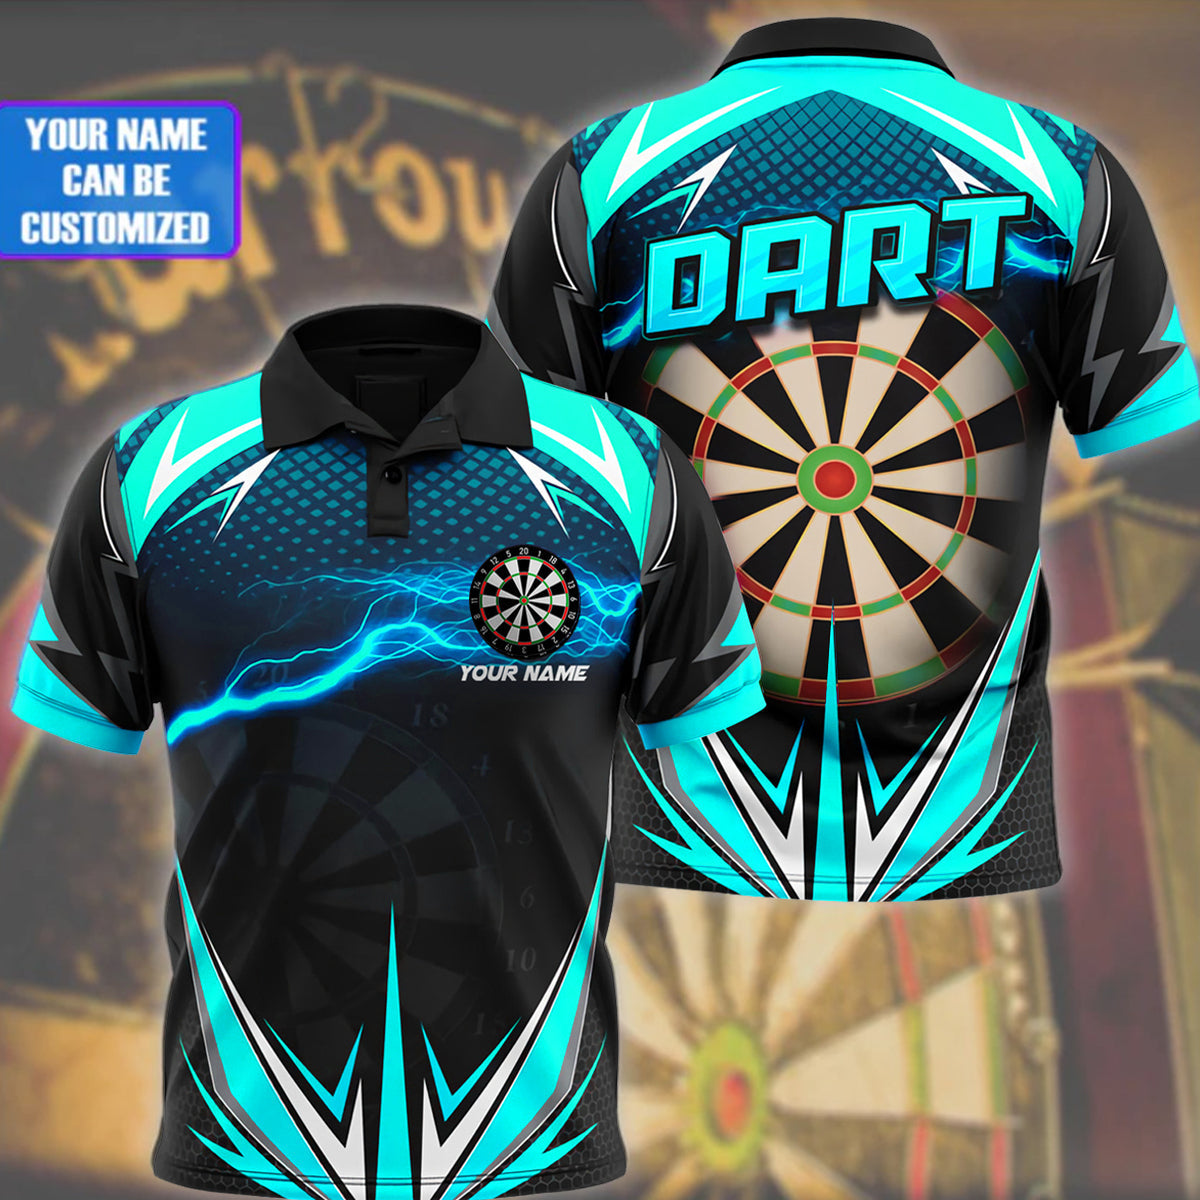 Customized with Name Gifts for Darts Players Polo Shirt/ Dart Shirt Full Printing/ Best Dart Players Gift/ Dart Shirt